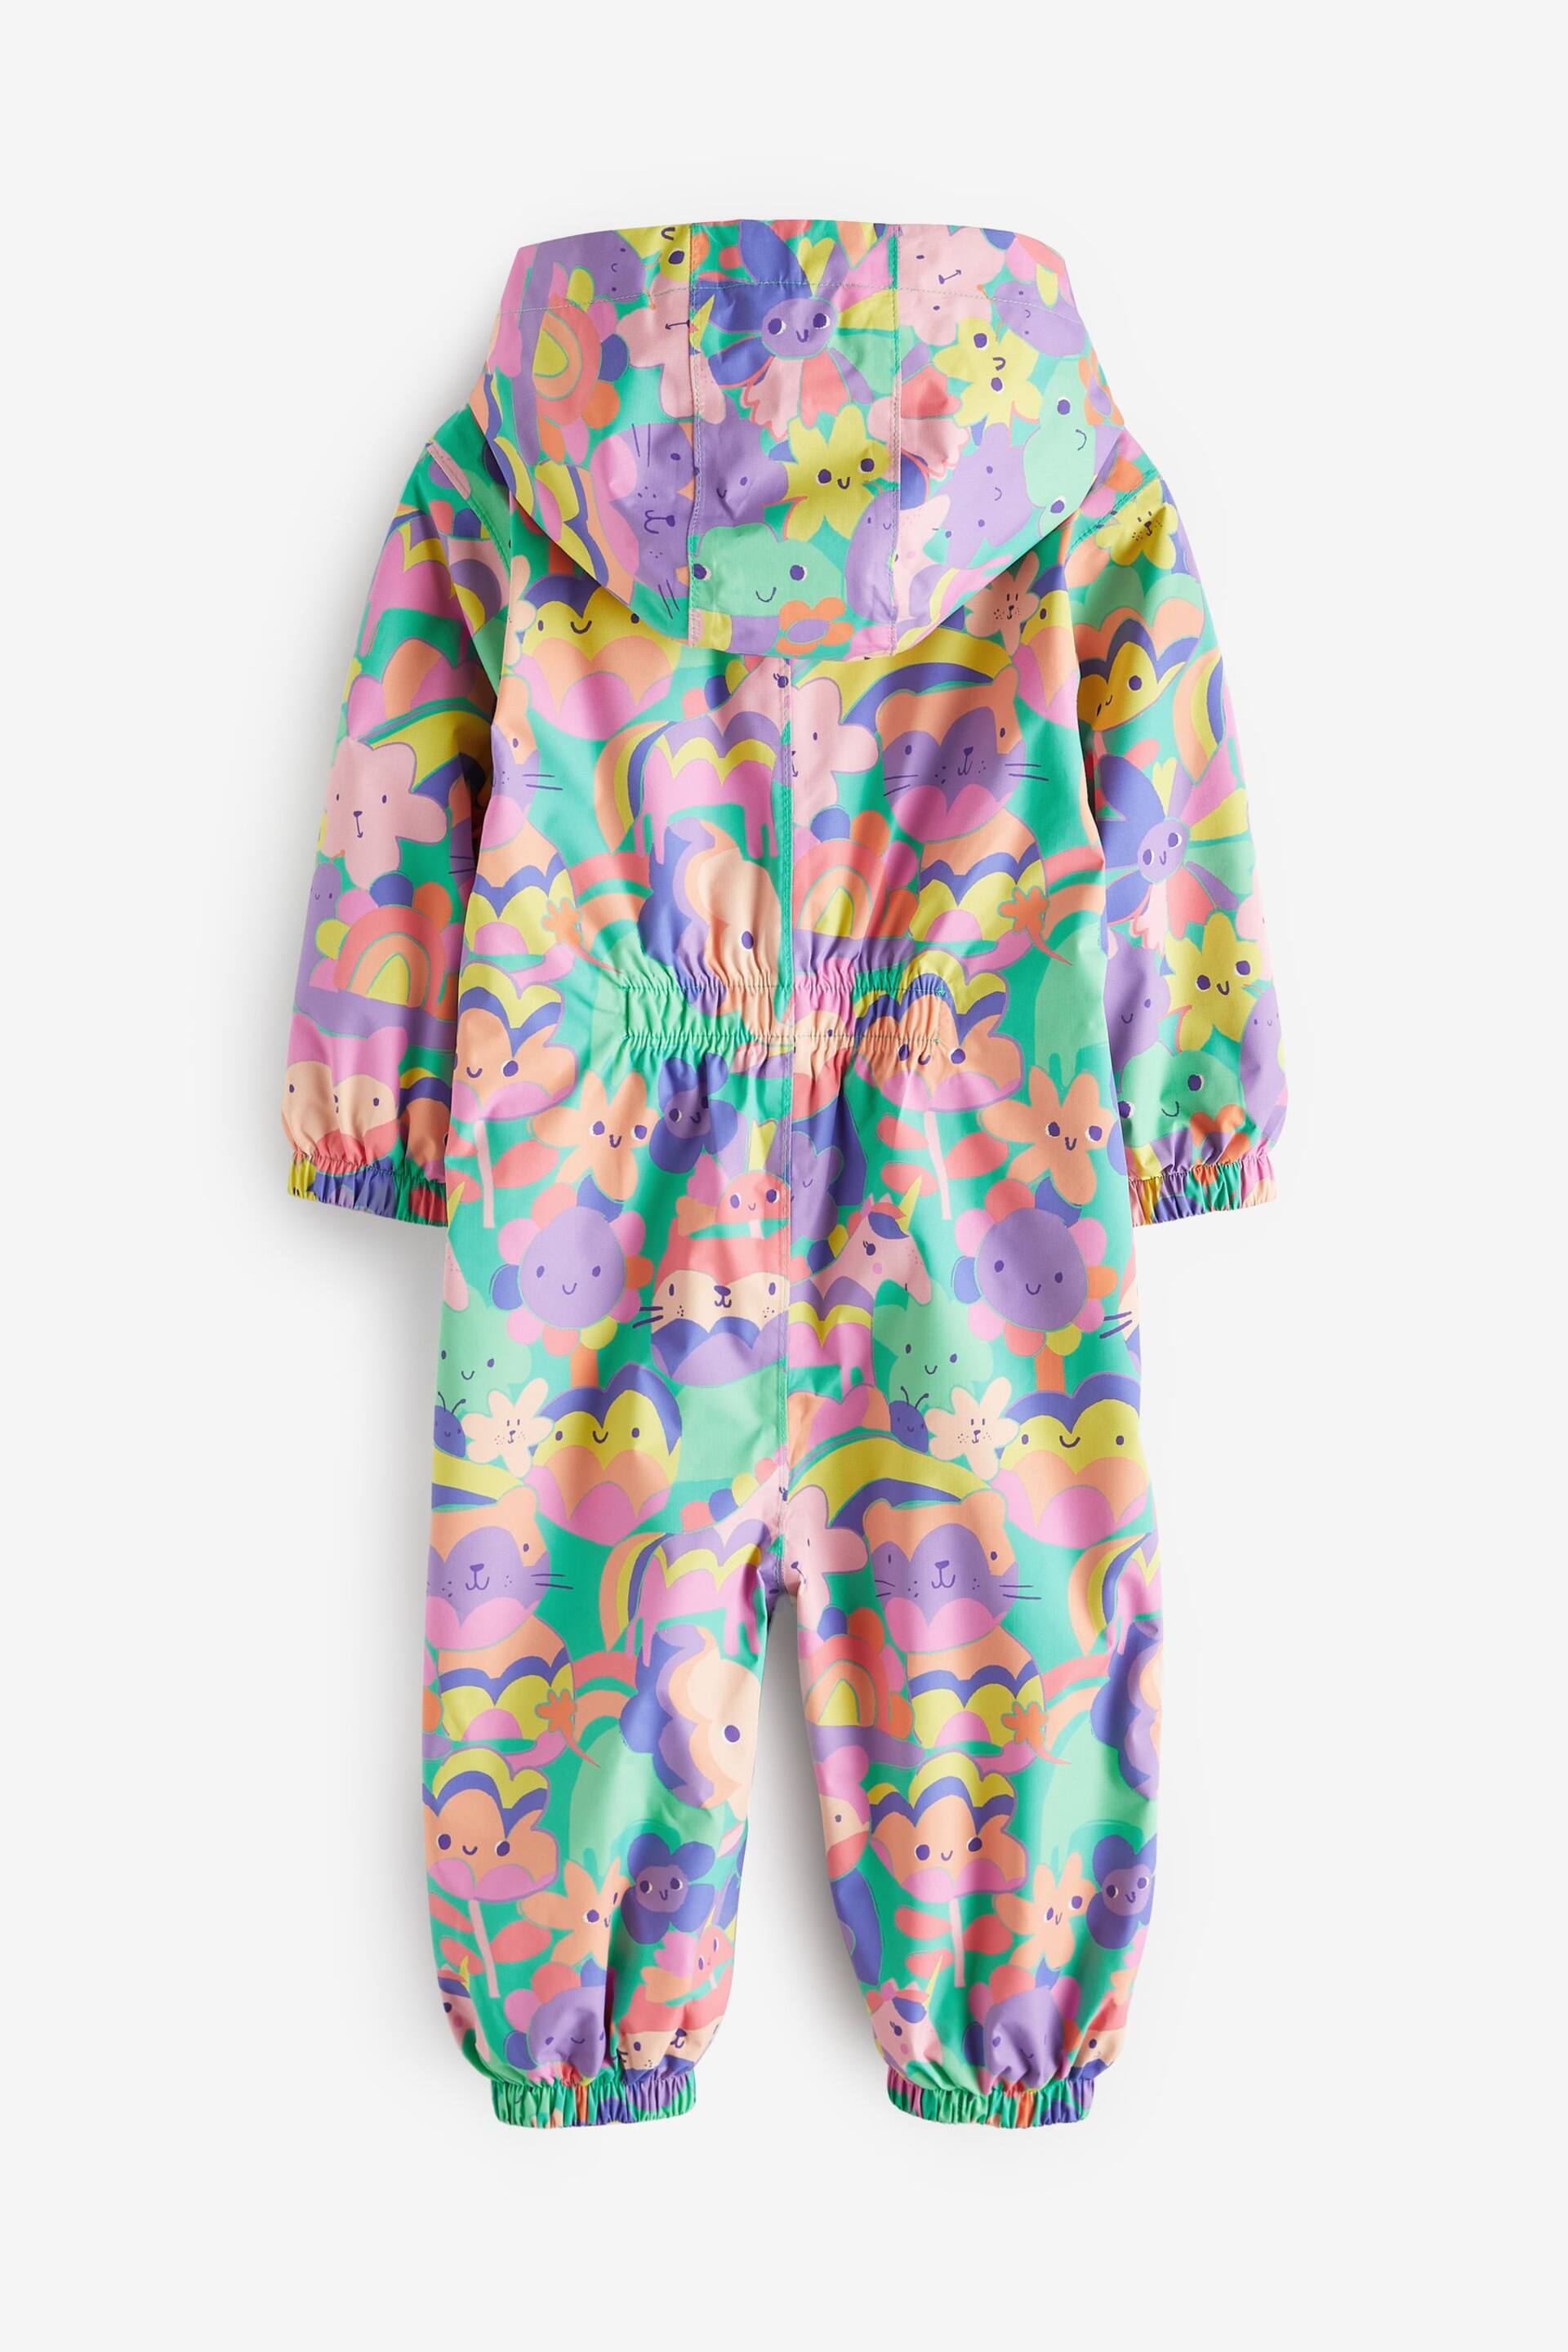 Multi Lightweight Waterproof Fleece Lined Printed Puddlesuit (3mths-7yrs) - Image 7 of 9